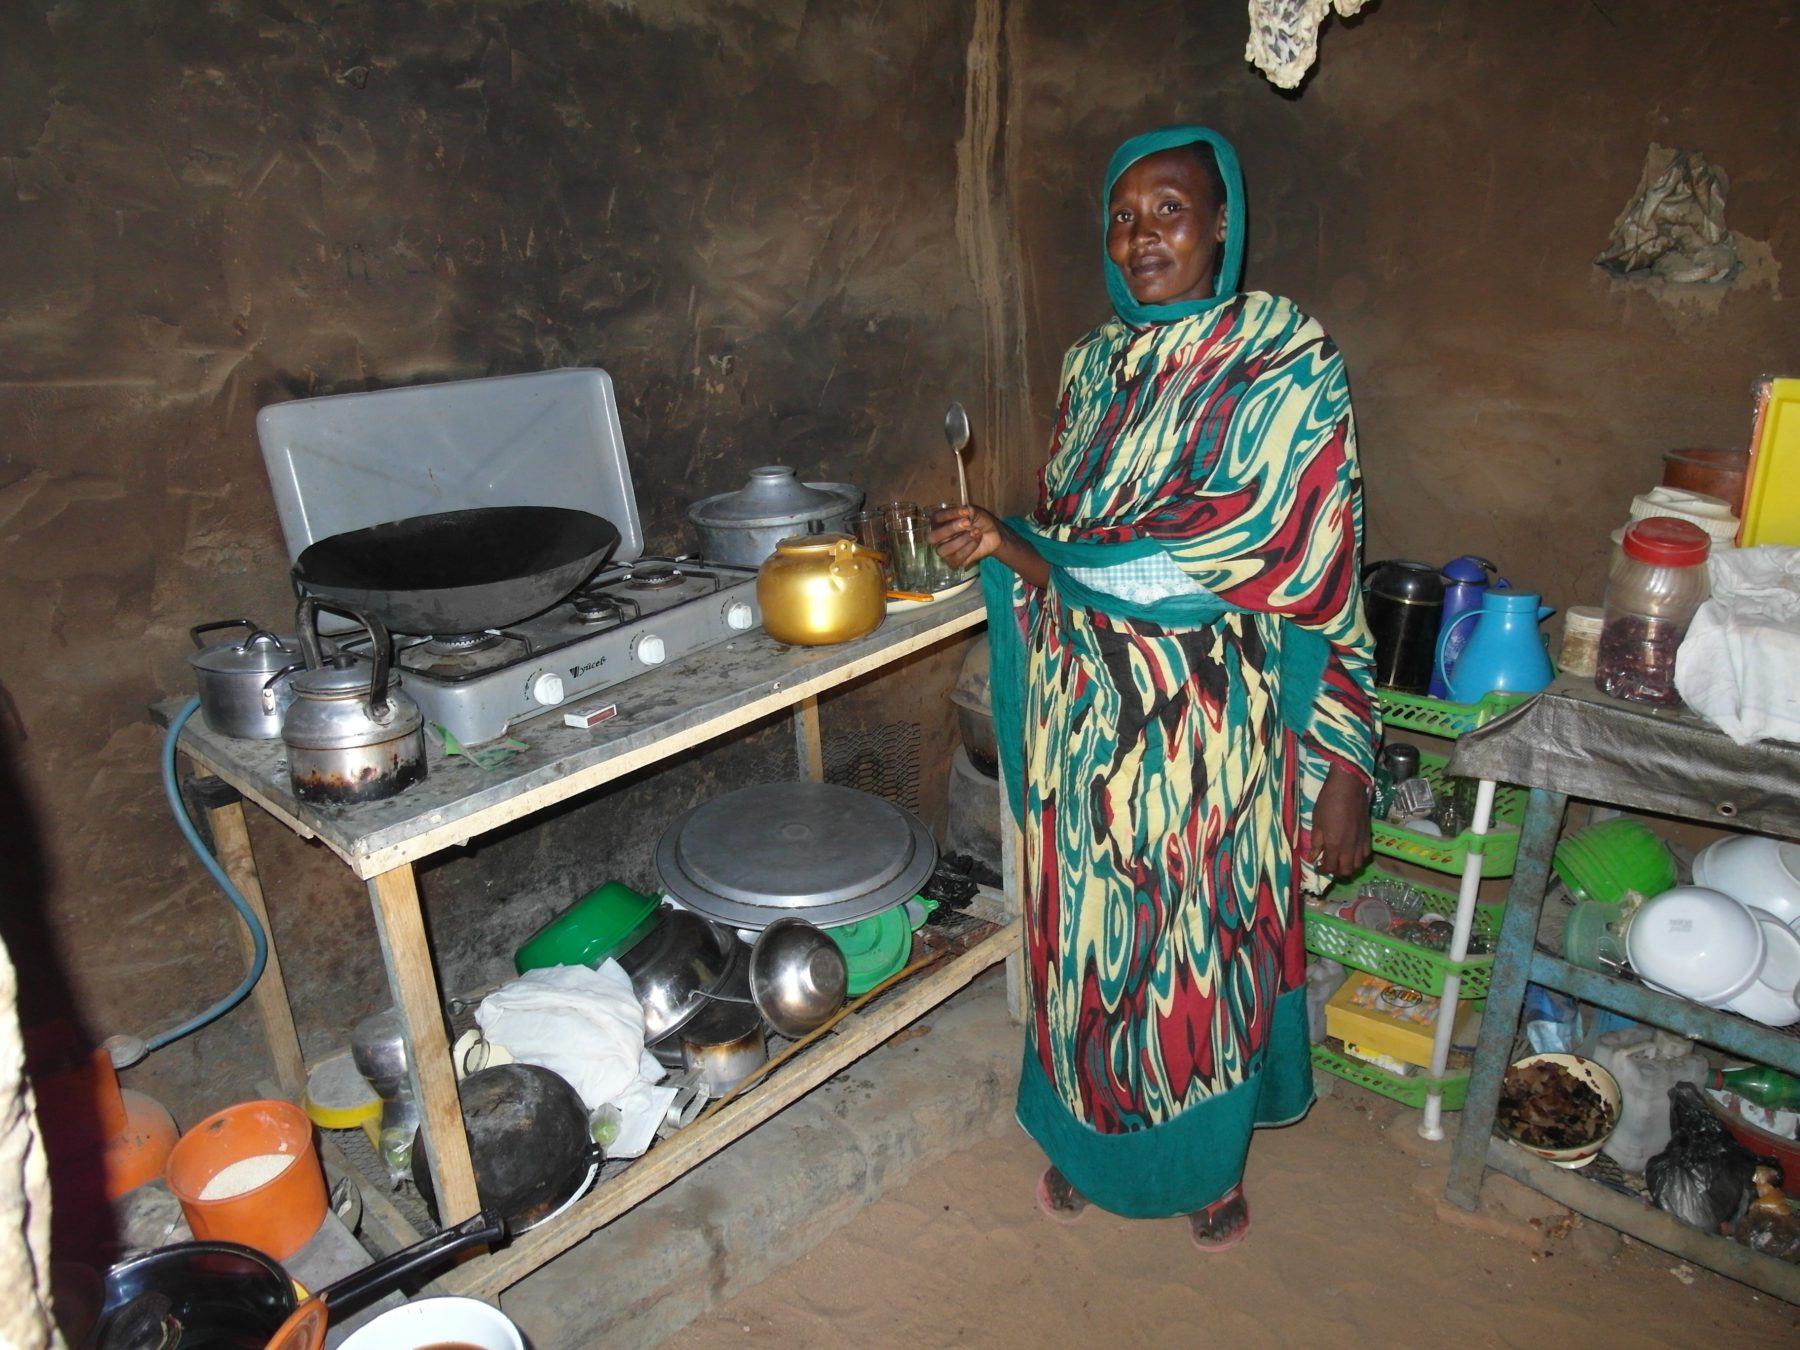 Energy access is a gender issue